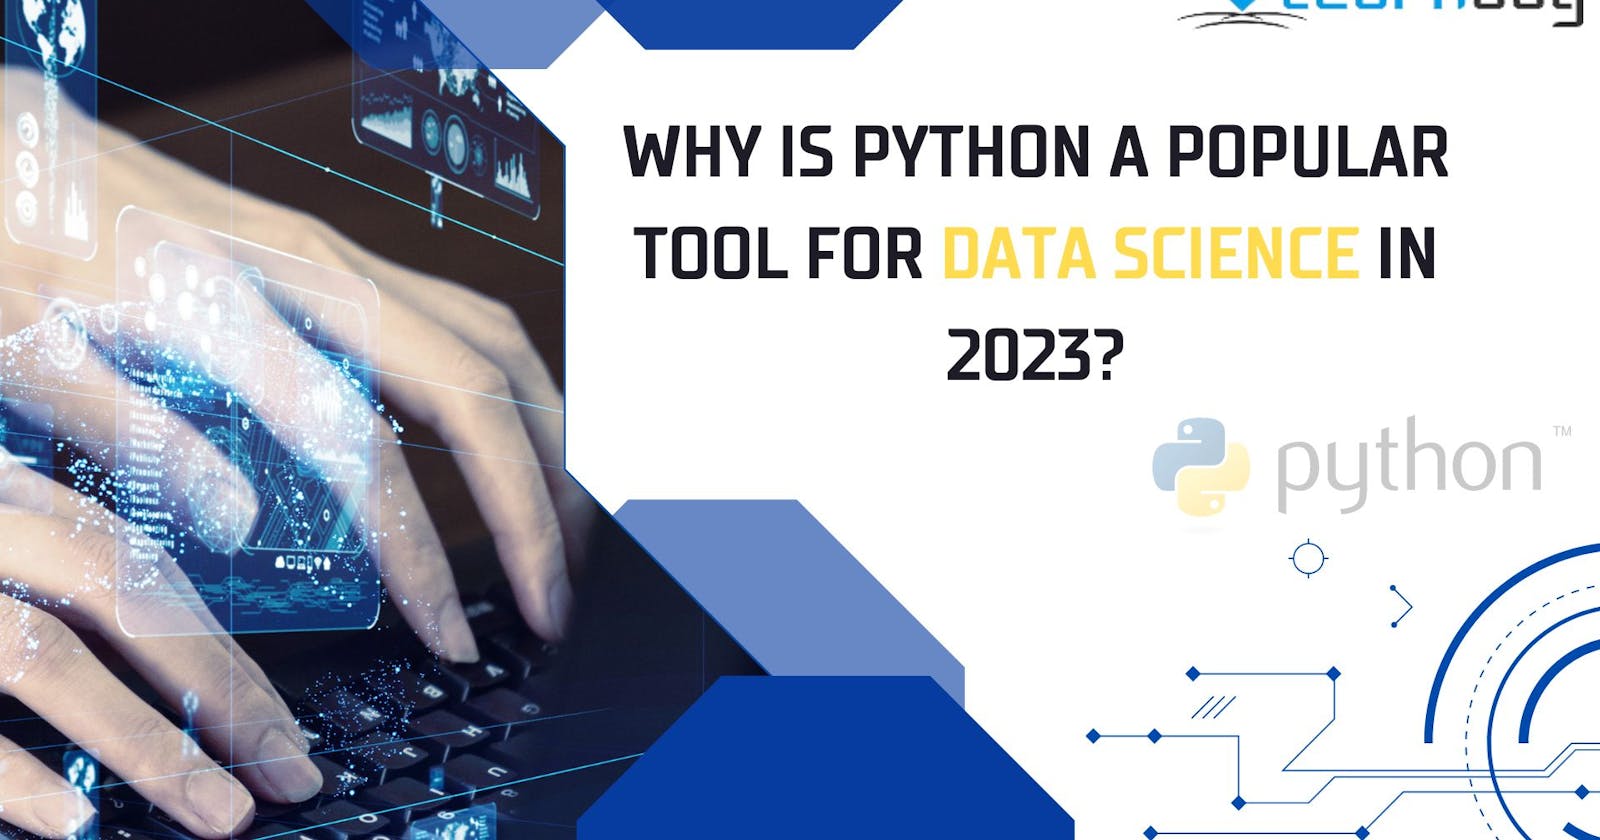 Why is Python a Popular Tool for Data Science in 2023?